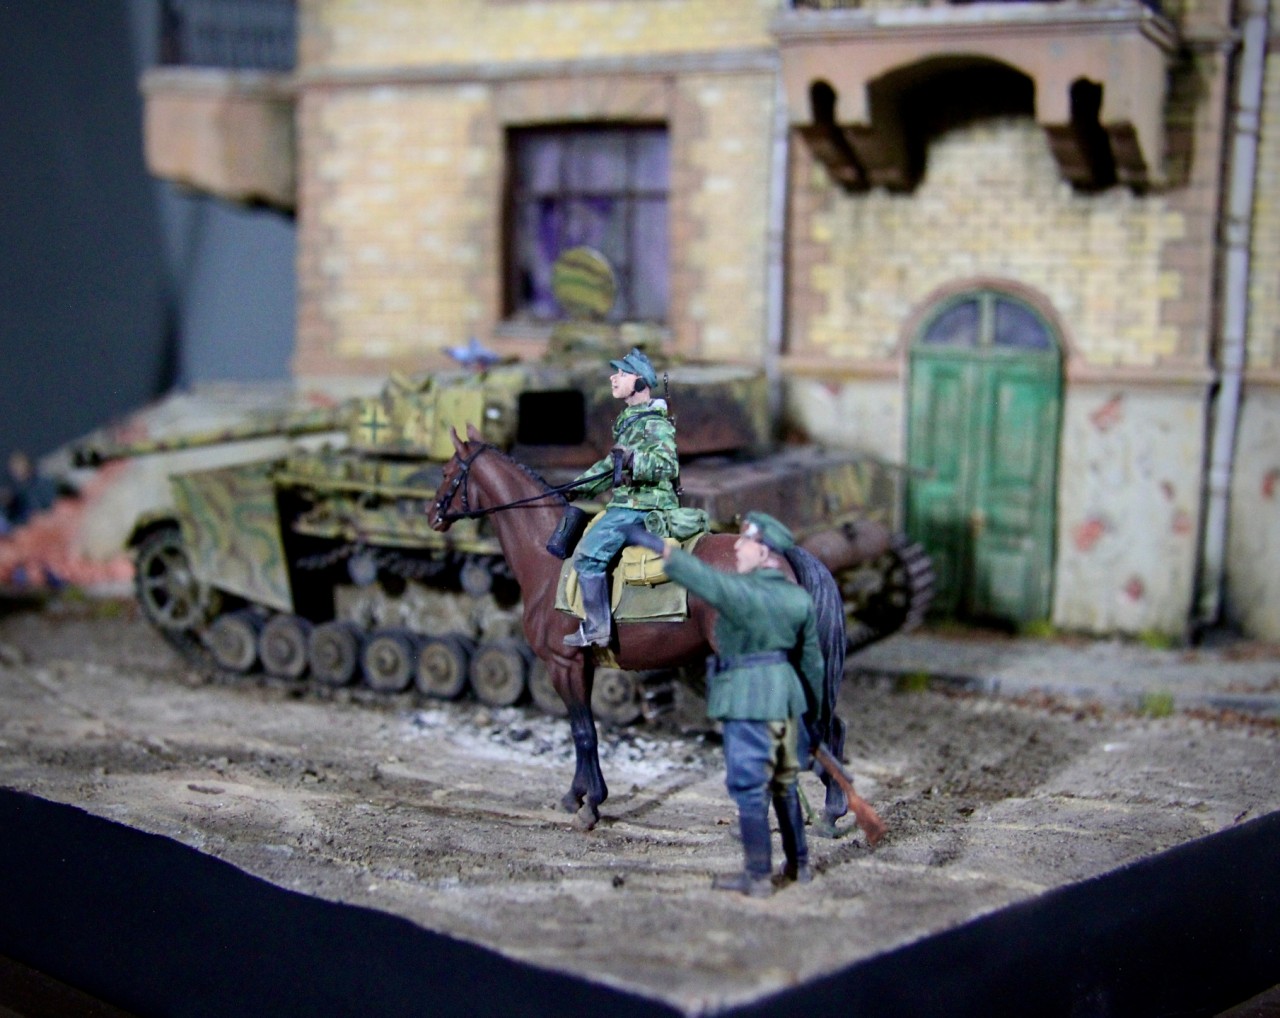 Dioramas and Vignettes: Hans, have we been here before? , photo #7